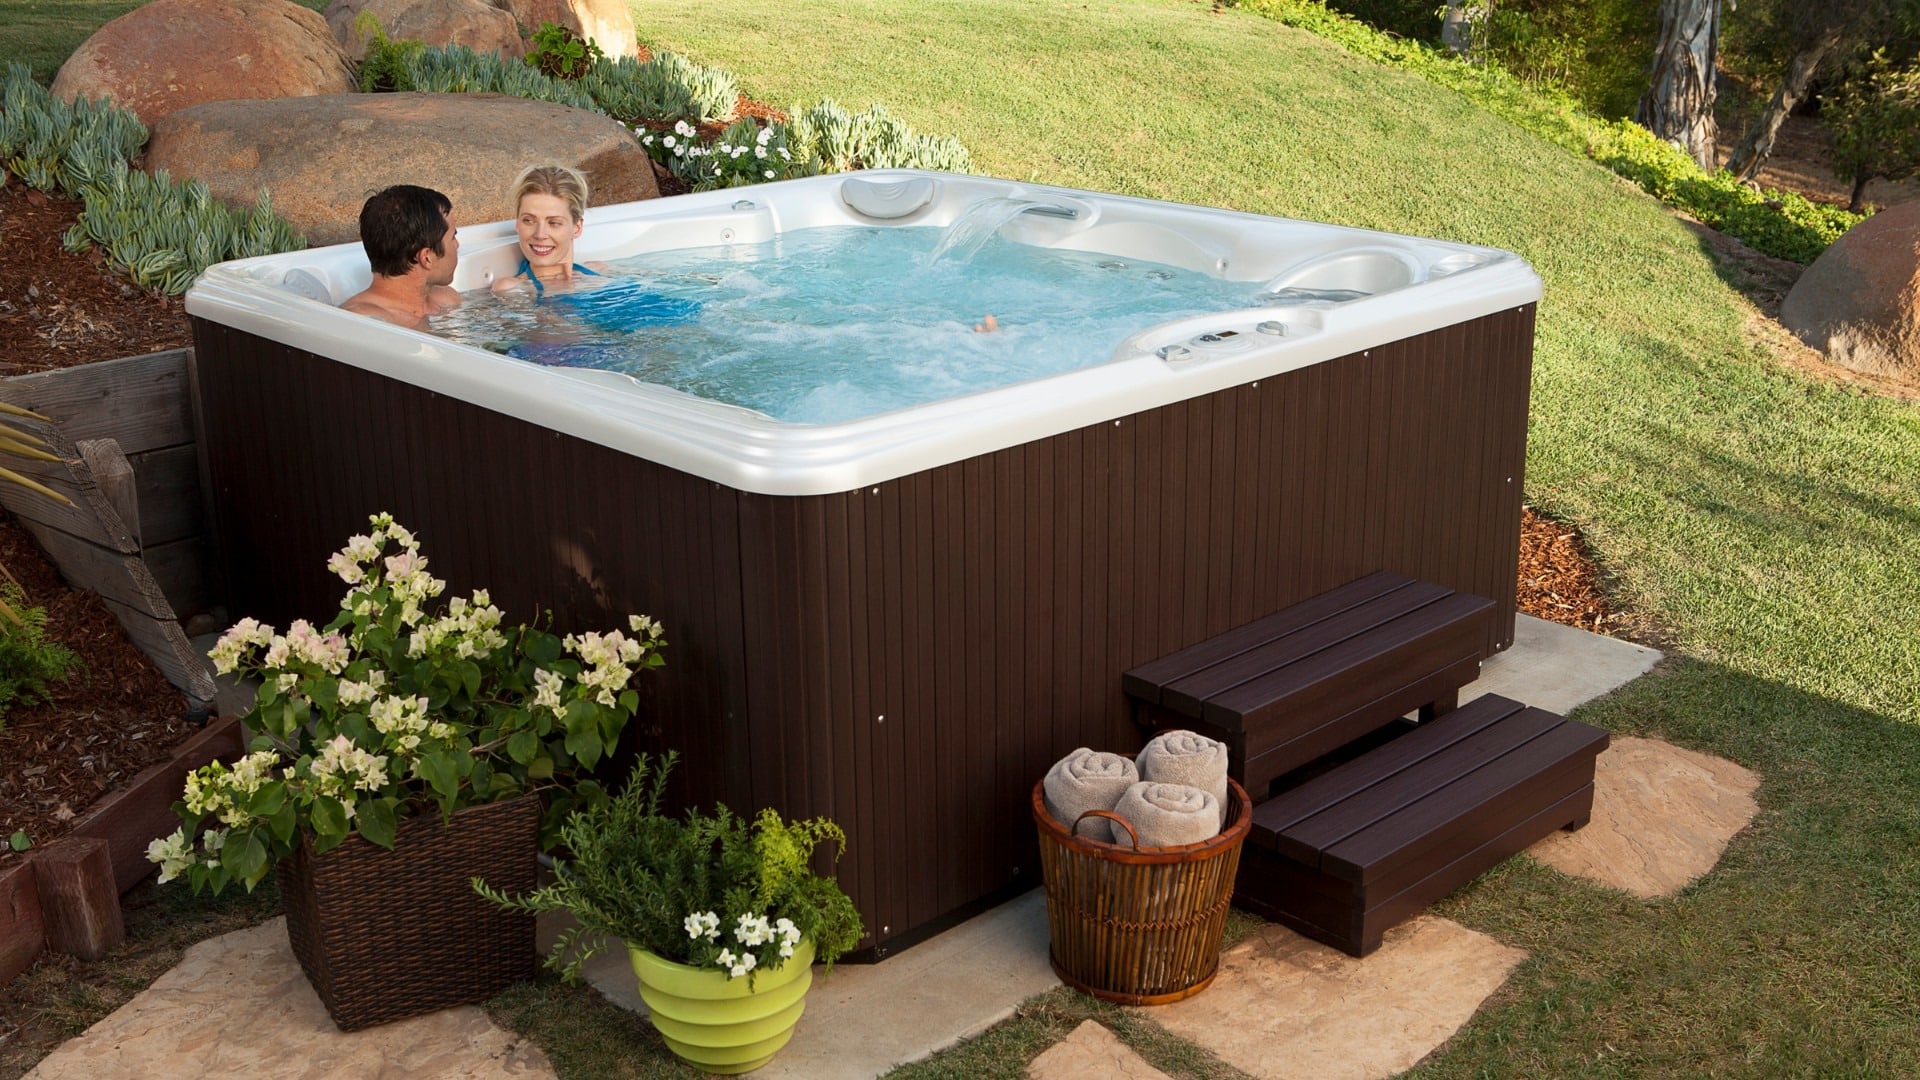 After thinking about 3 things to consider before situating your hot tub, this couple decided to place their hot tub outside within some rocky landscaping.